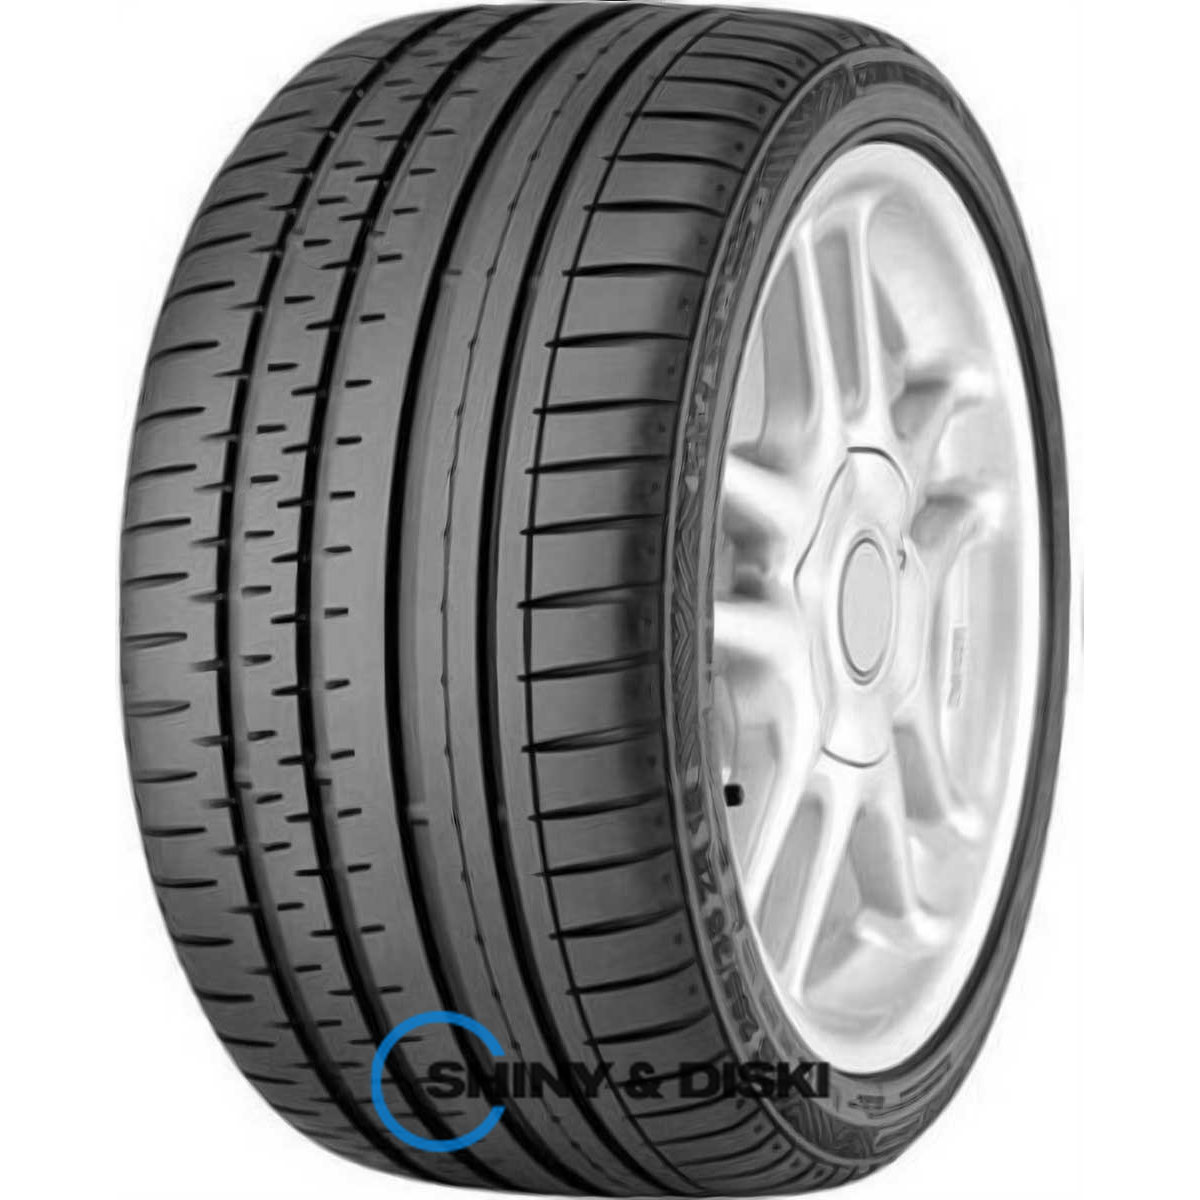 continental sportcontact 285/30 r18 zr